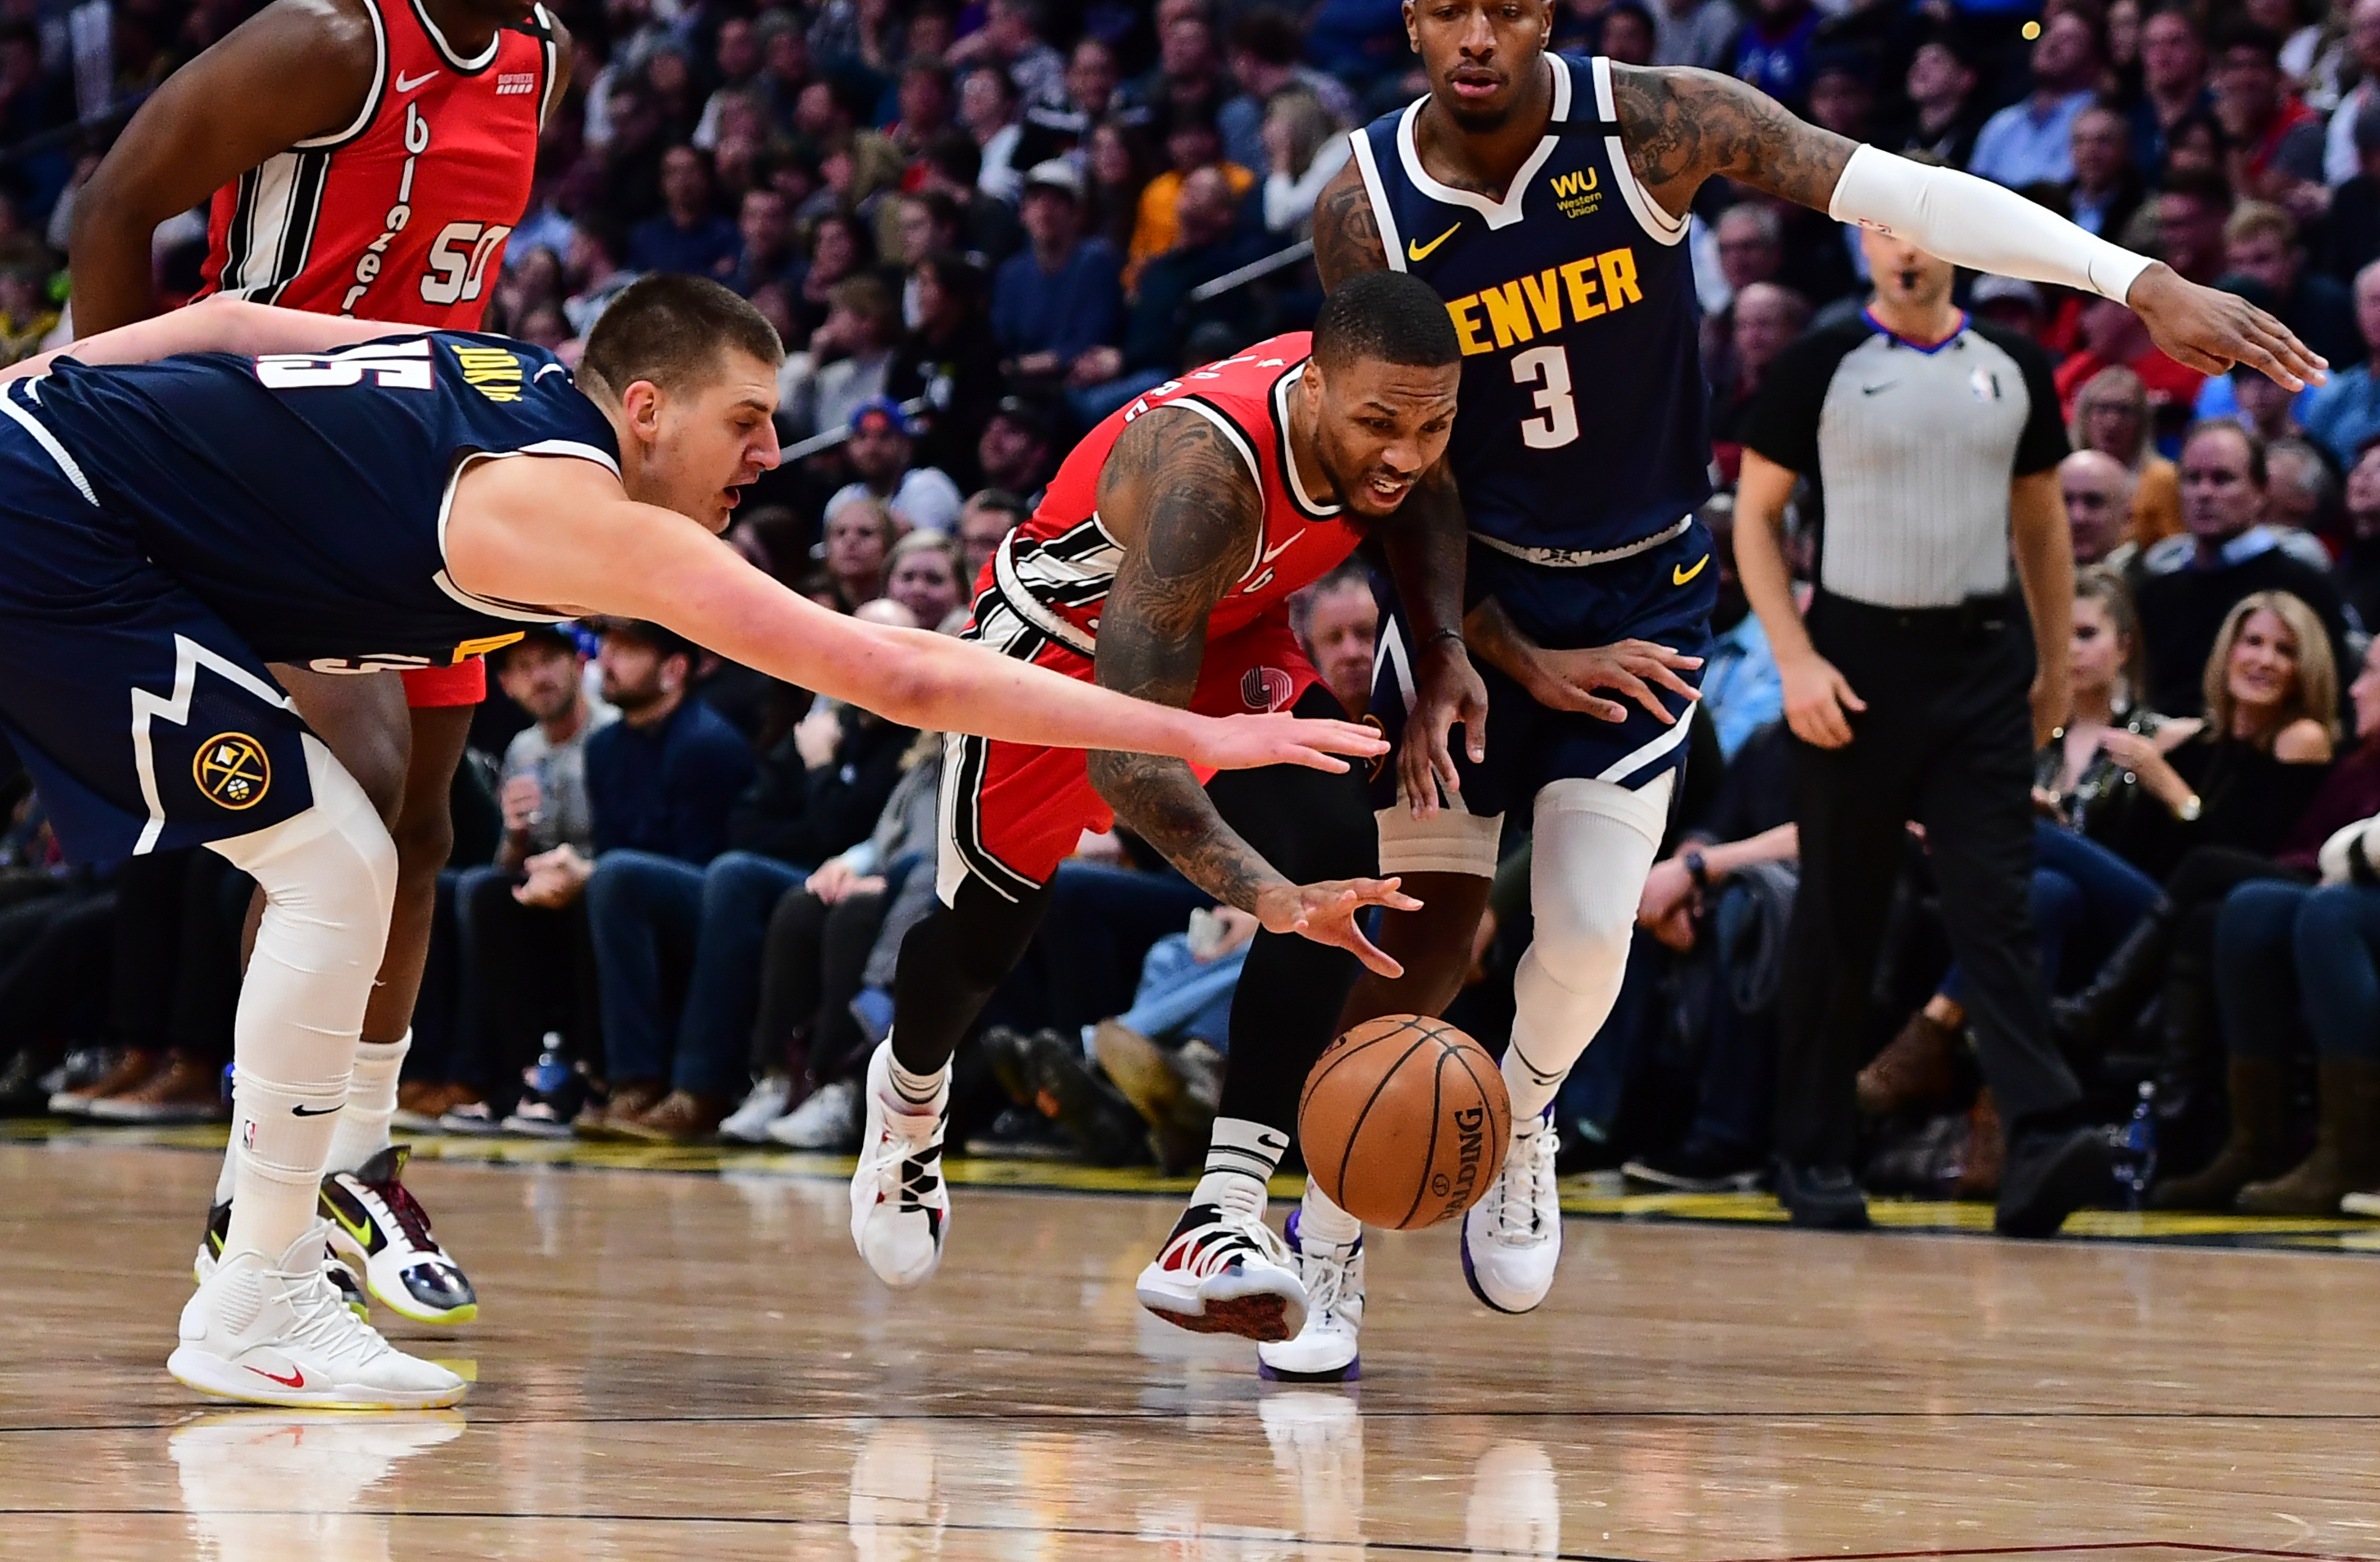 Nuggets center Nikola Jokic (15) reaches in on Portland Trail Blazers guard Damian Lillard (0) as forward Torrey Craig (3) chases from behind in the second half at Pepsi Center. Mandatory Credit: Ron Chenoy-USA TODAY Sports